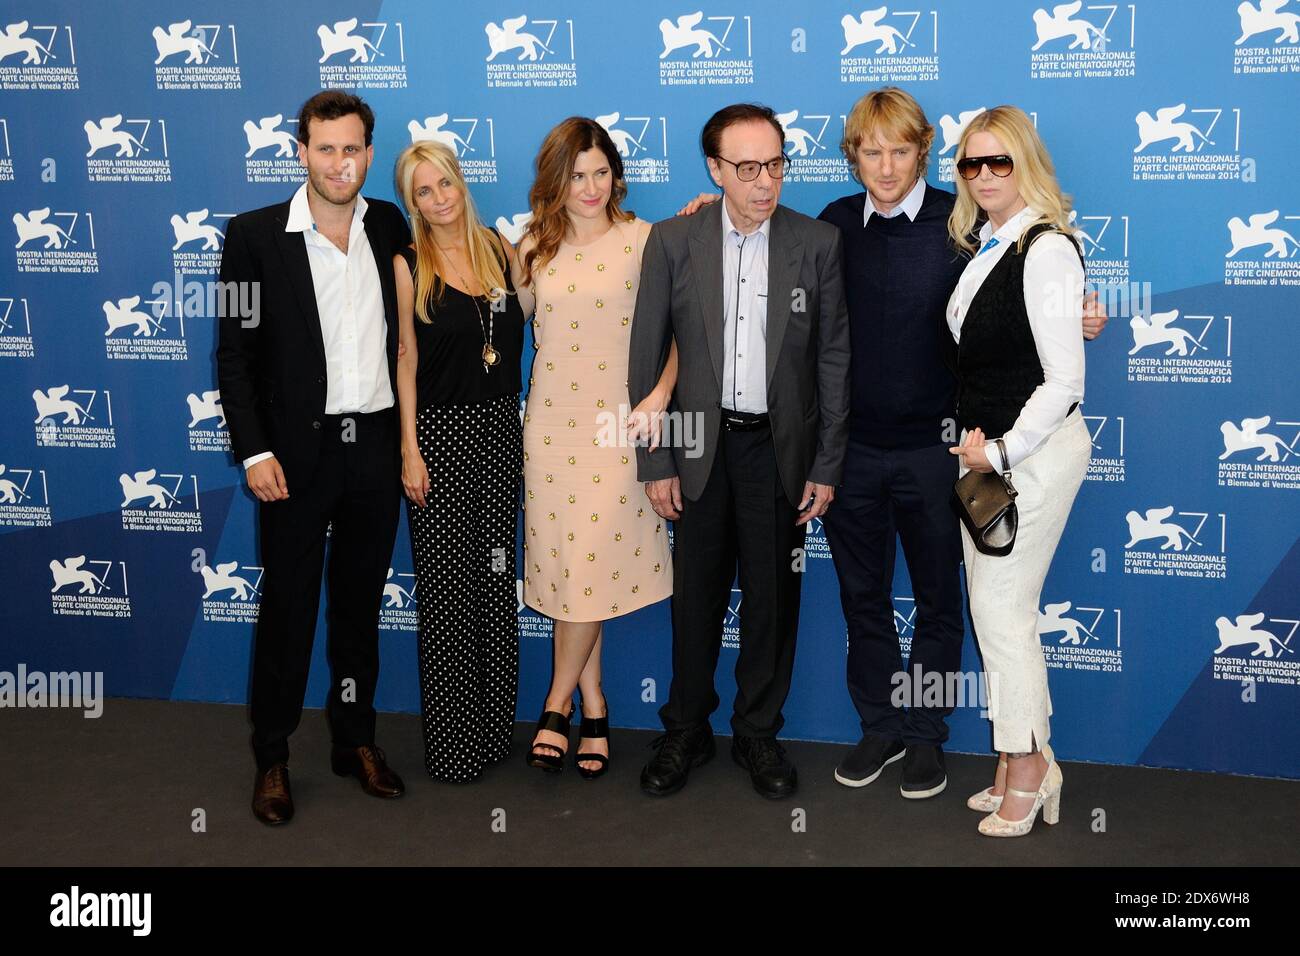 roducers Logan Levy, Holly Wiersma, actress Kathryn Hahn, director Peter Bogdanovich, actor Owen Wilson and producer Louise Stratten attending the She's Funny that Way Photocall during the 71st International Venice Film Festival, on August 29, 2014 in Venice, Italy. Photo by Aurore Marechal/ABACAPRESS.COM Stock Photo